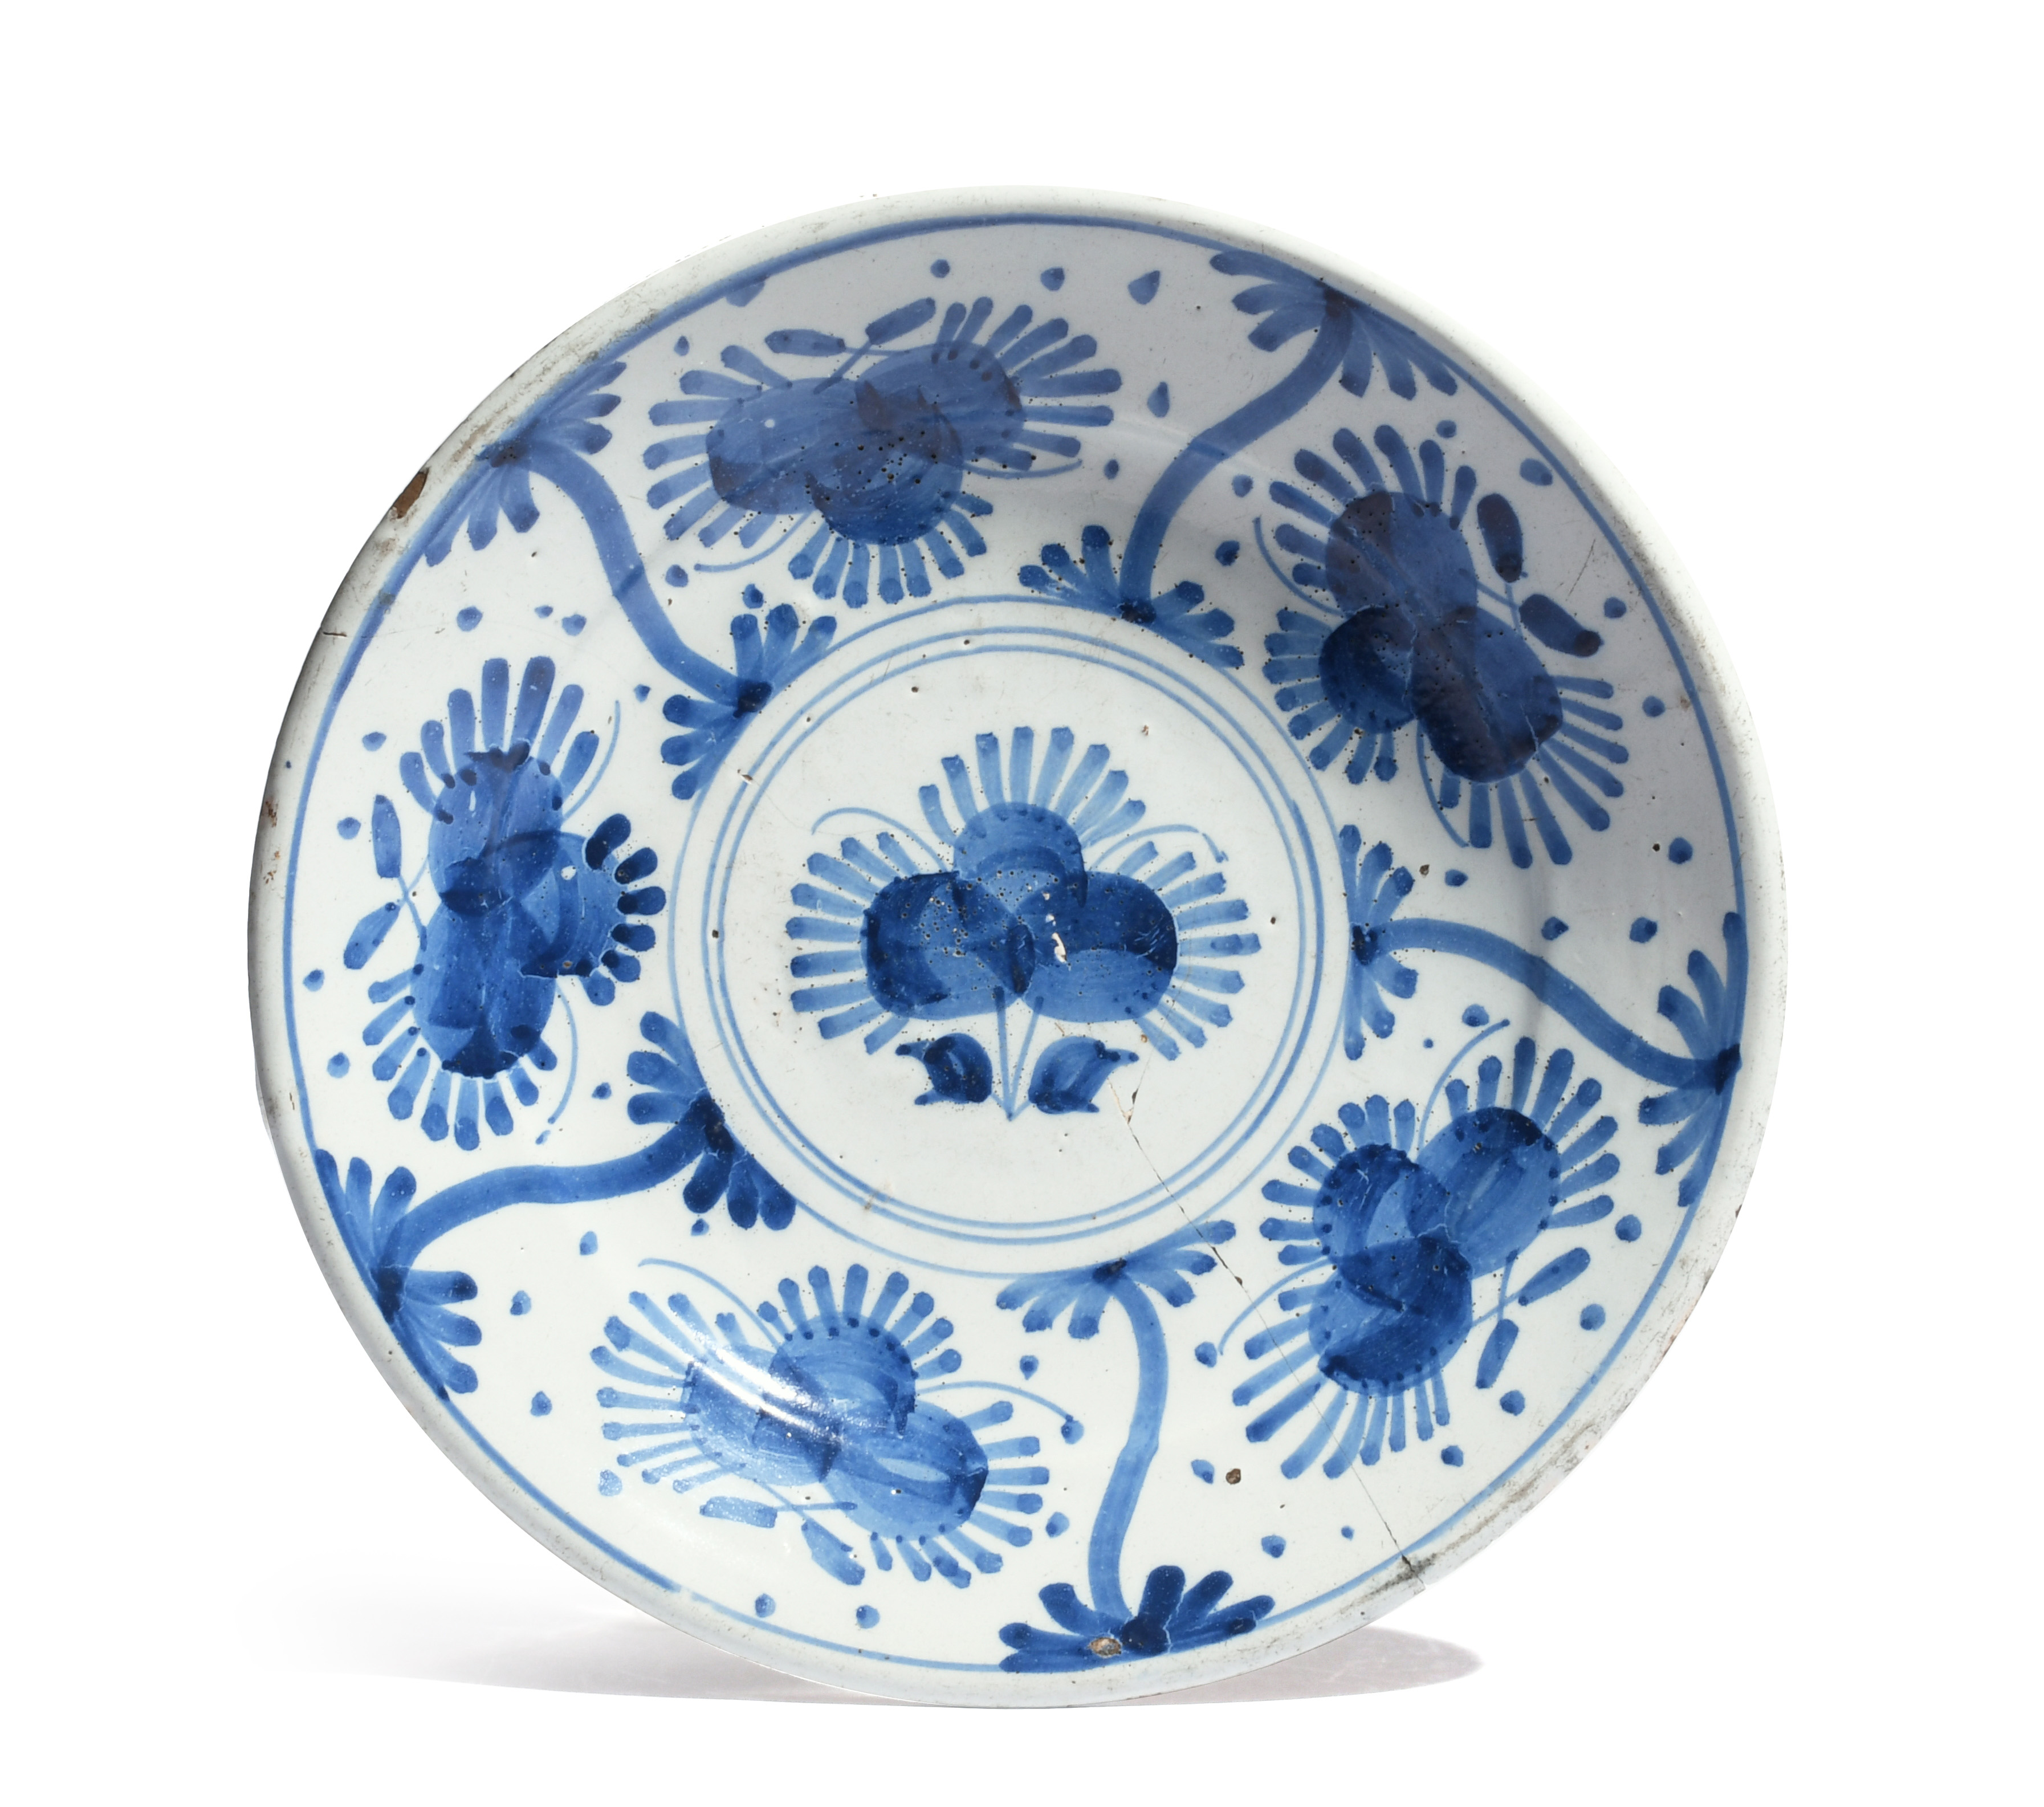 An early London delftware charger c.1660, painted in blue with a stylized flower to the well